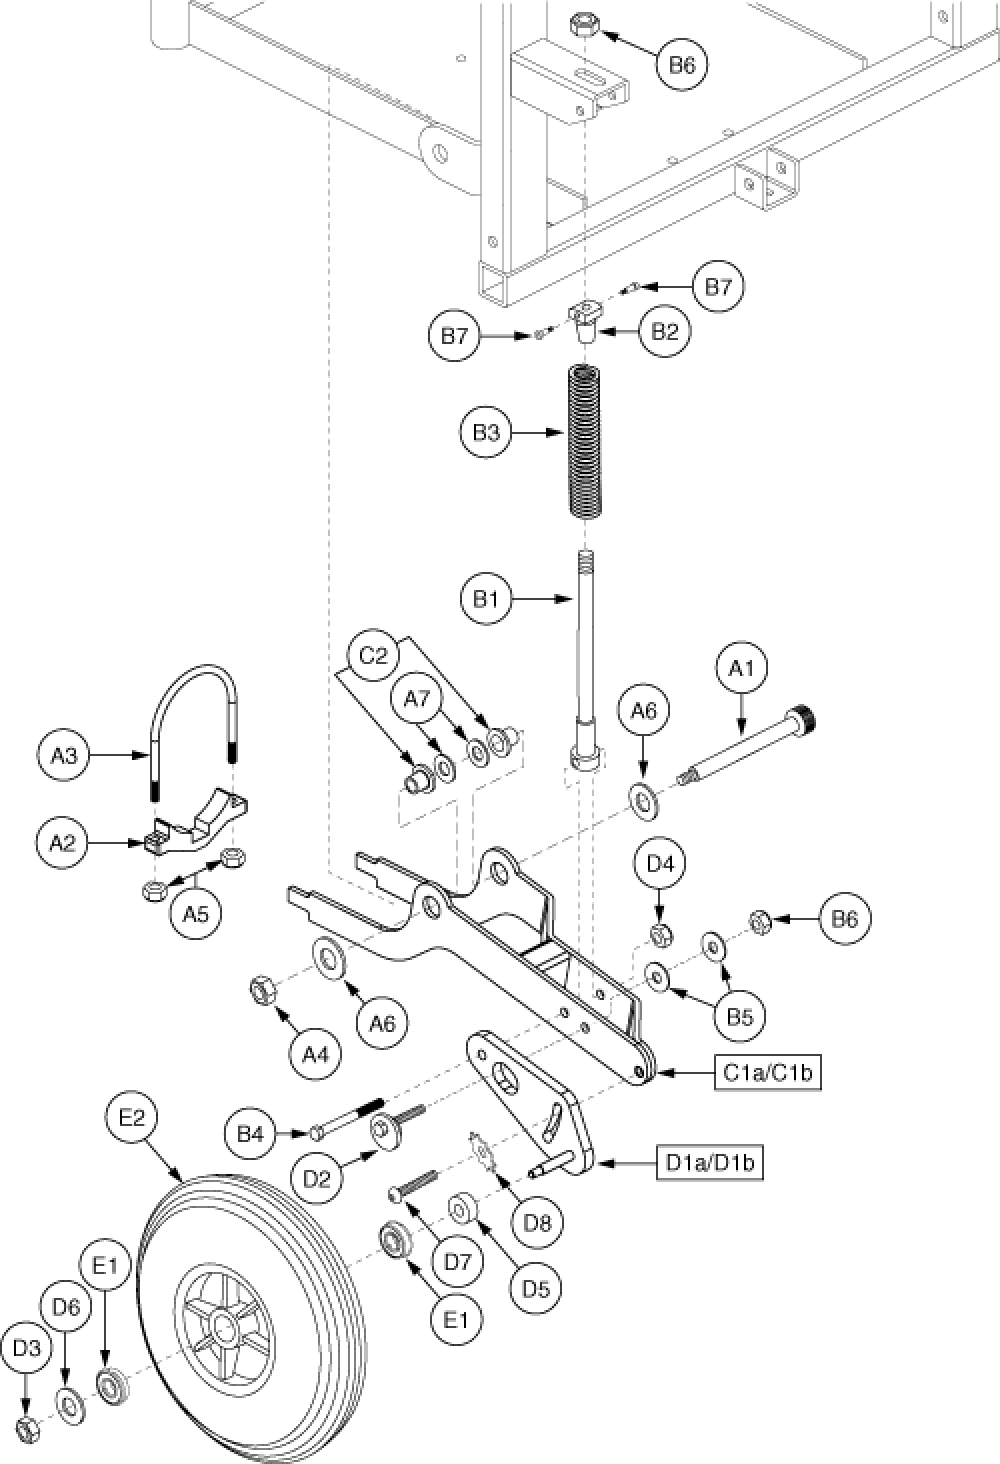 Anti-tip Assembly - E679, Standard Seating parts diagram